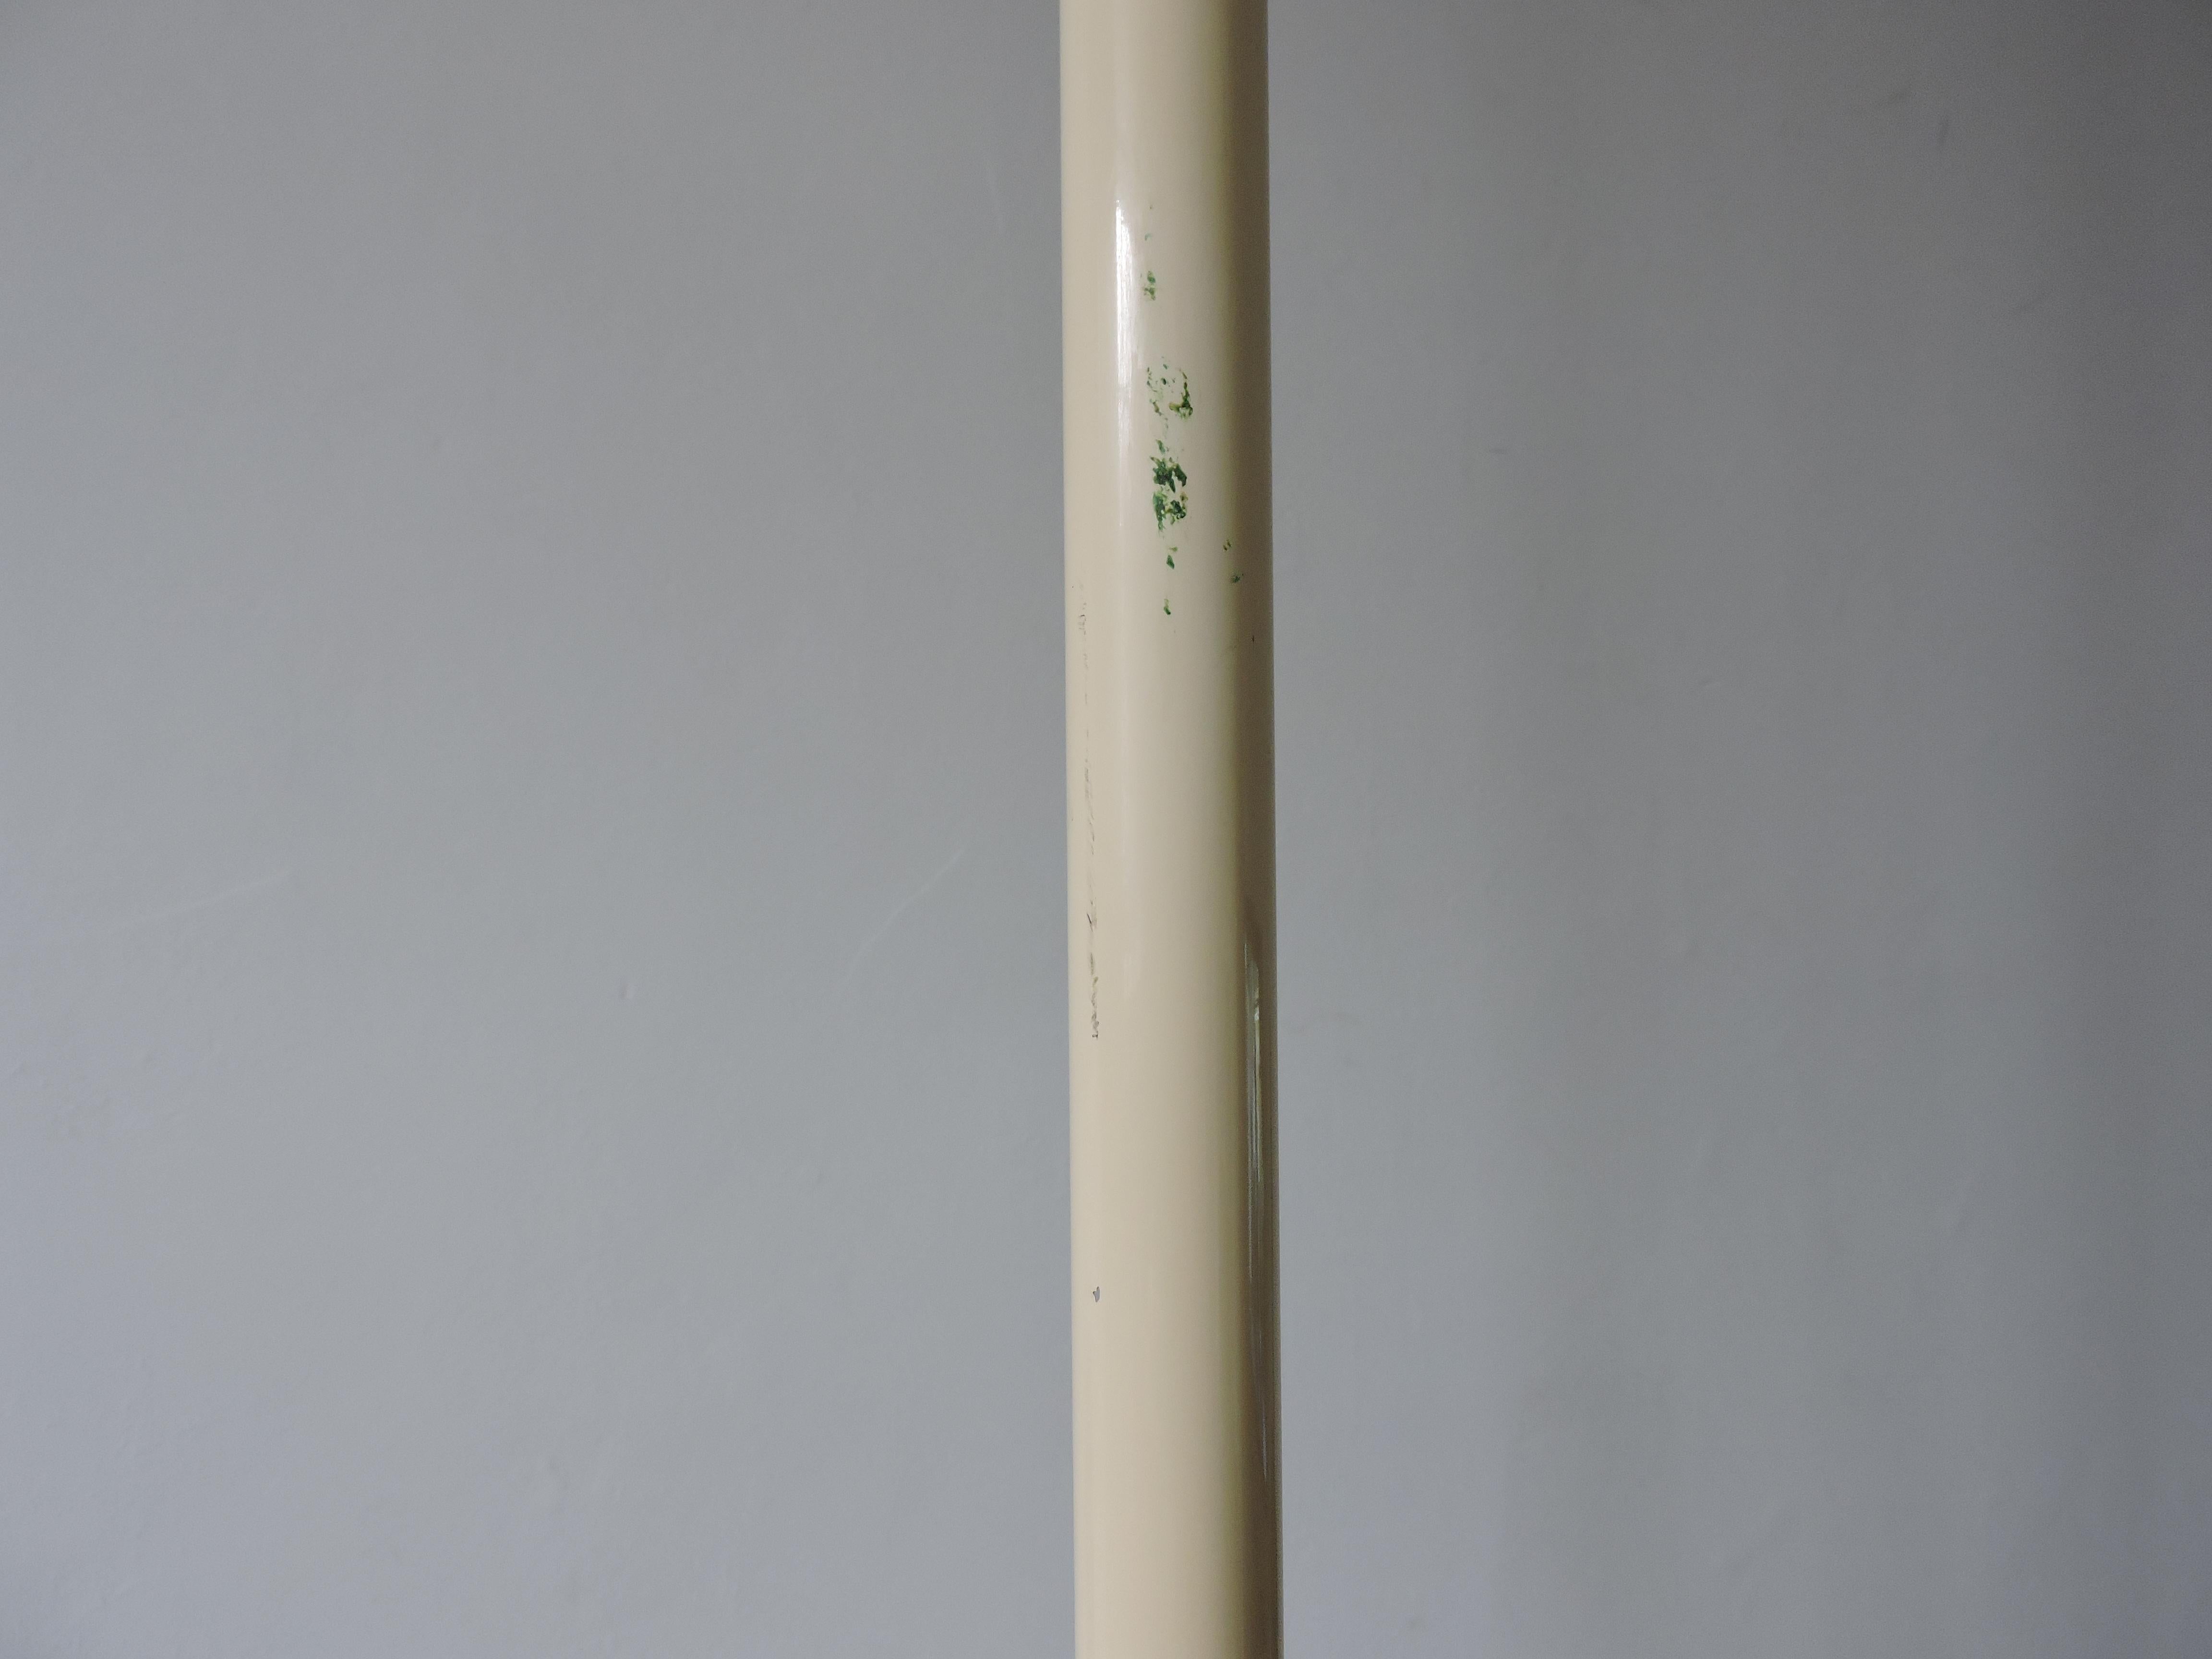 Vintage Italian Cream Model Rl 101/5 Floor Lamps from Relux, Set of Two For Sale 2